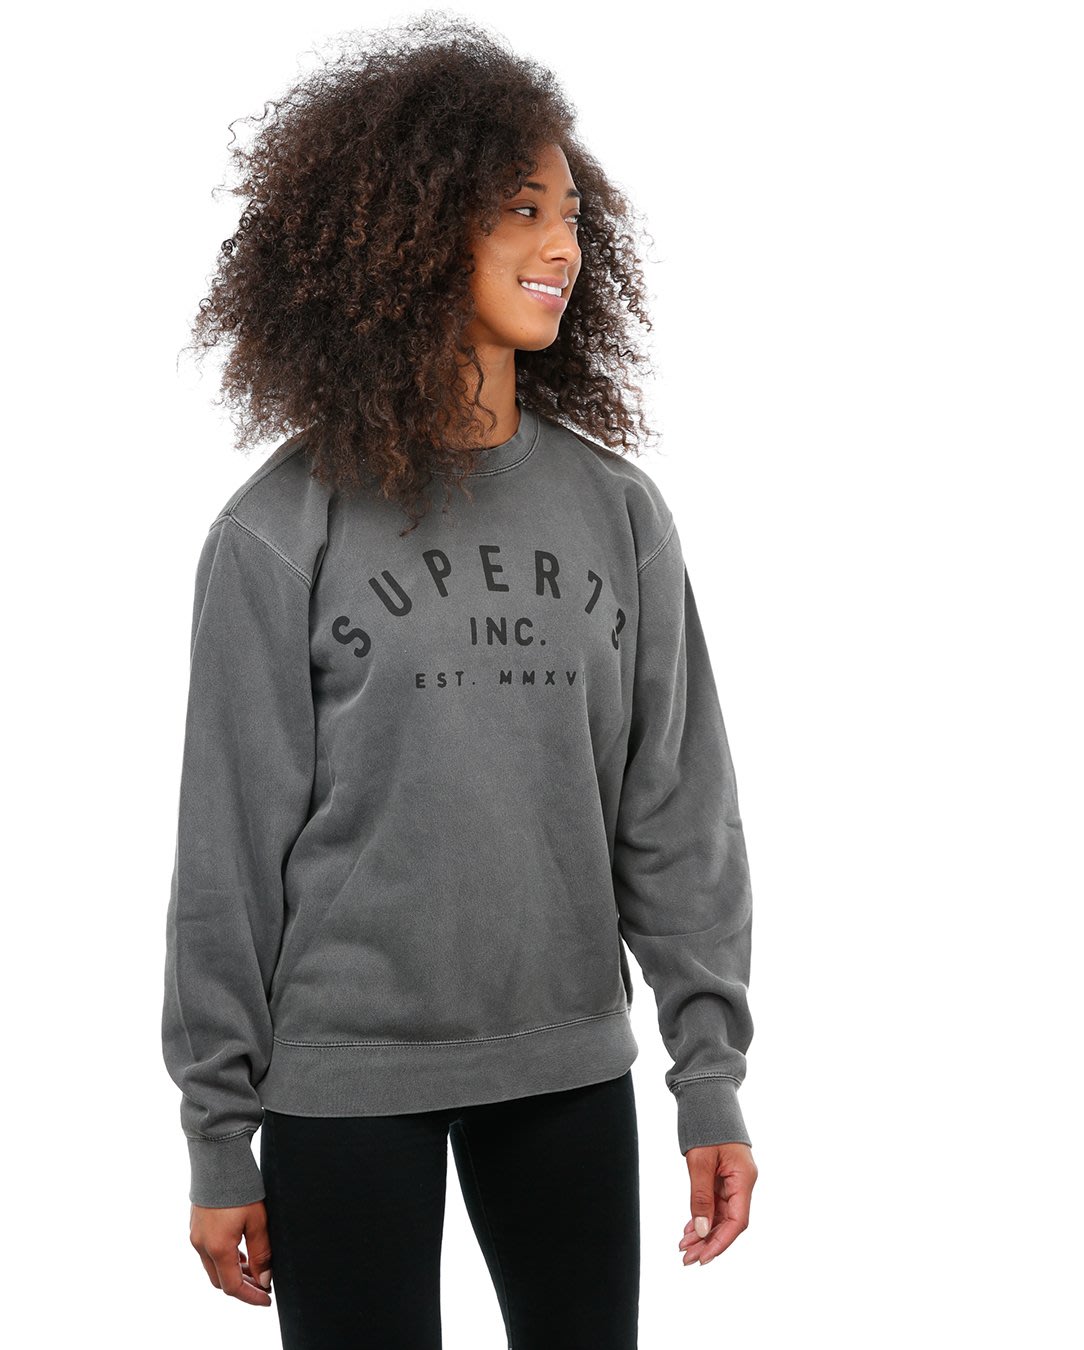 Front view of female model in Pigment Black Classic Crew Sweatshirt on white background.